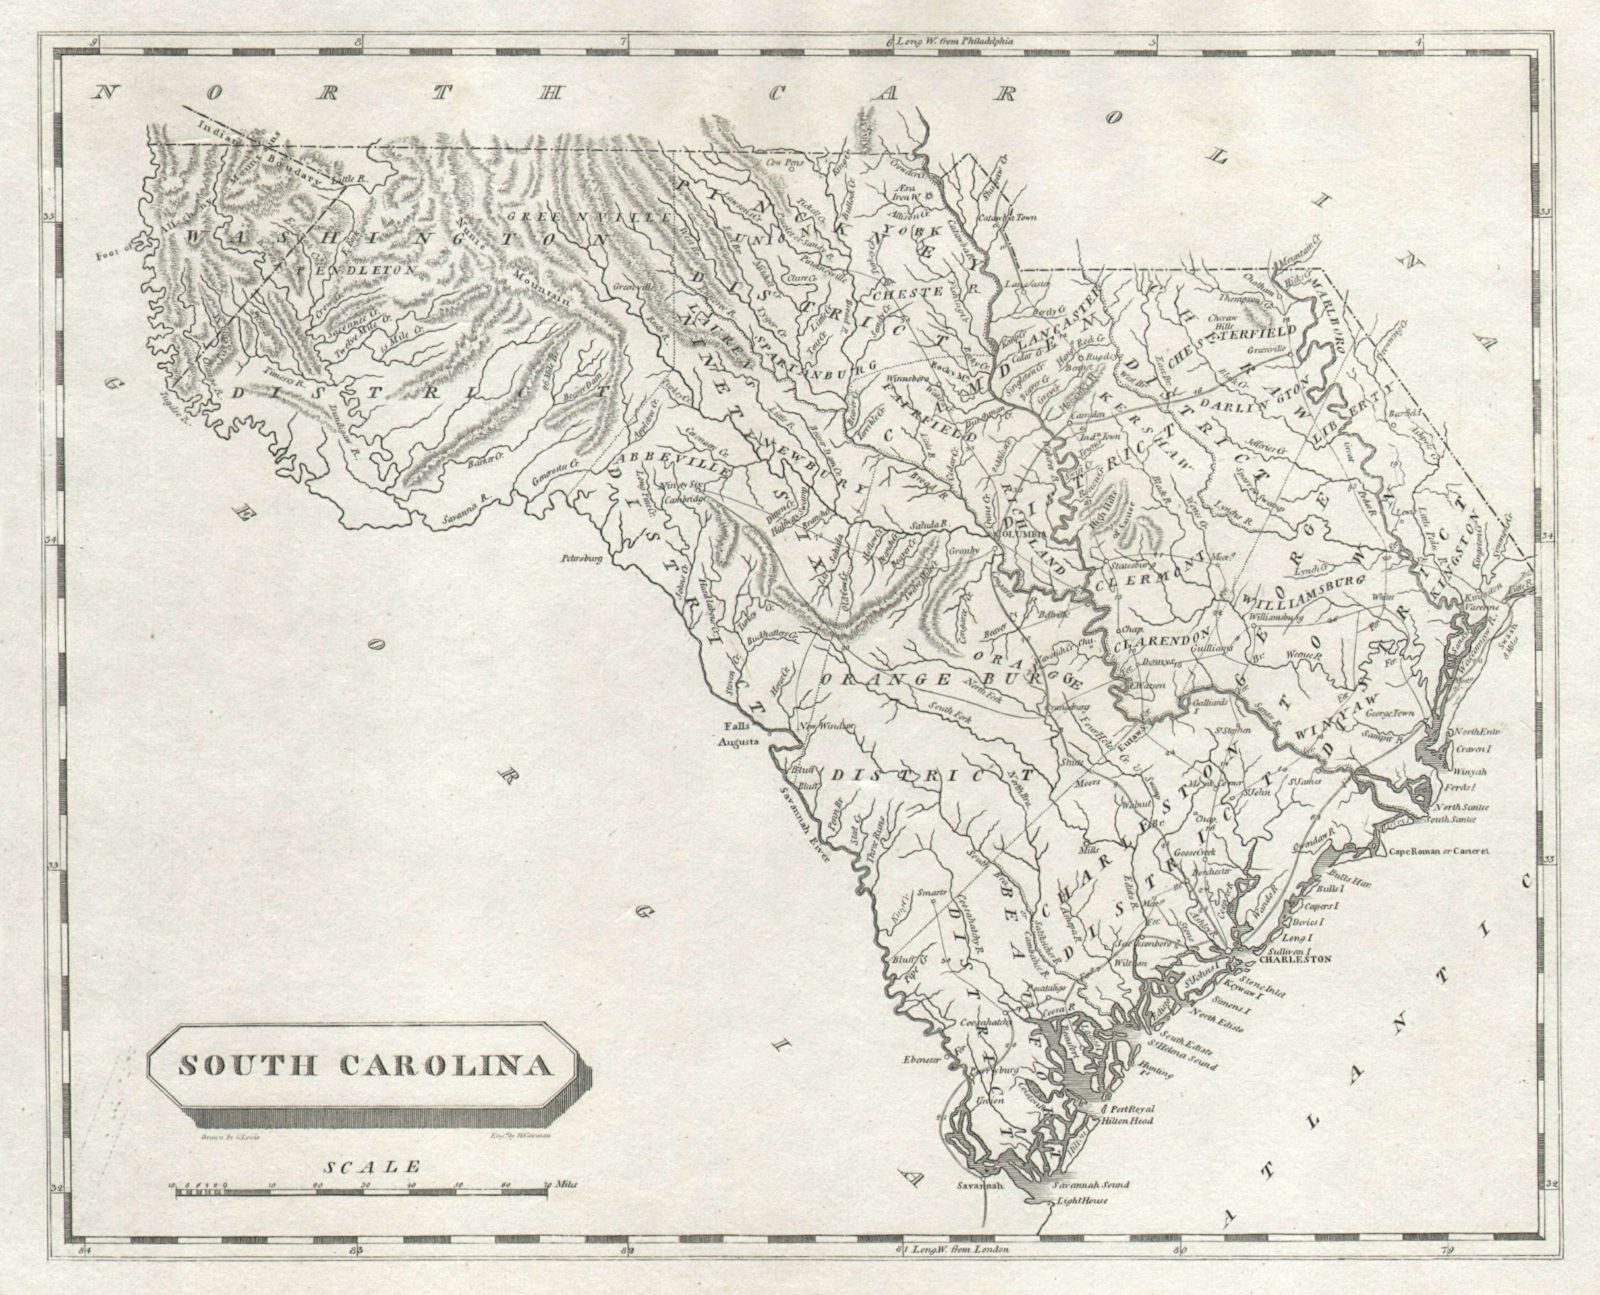 Associate Product South Carolina state map by Arrowsmith & Lewis 1812 old antique plan chart